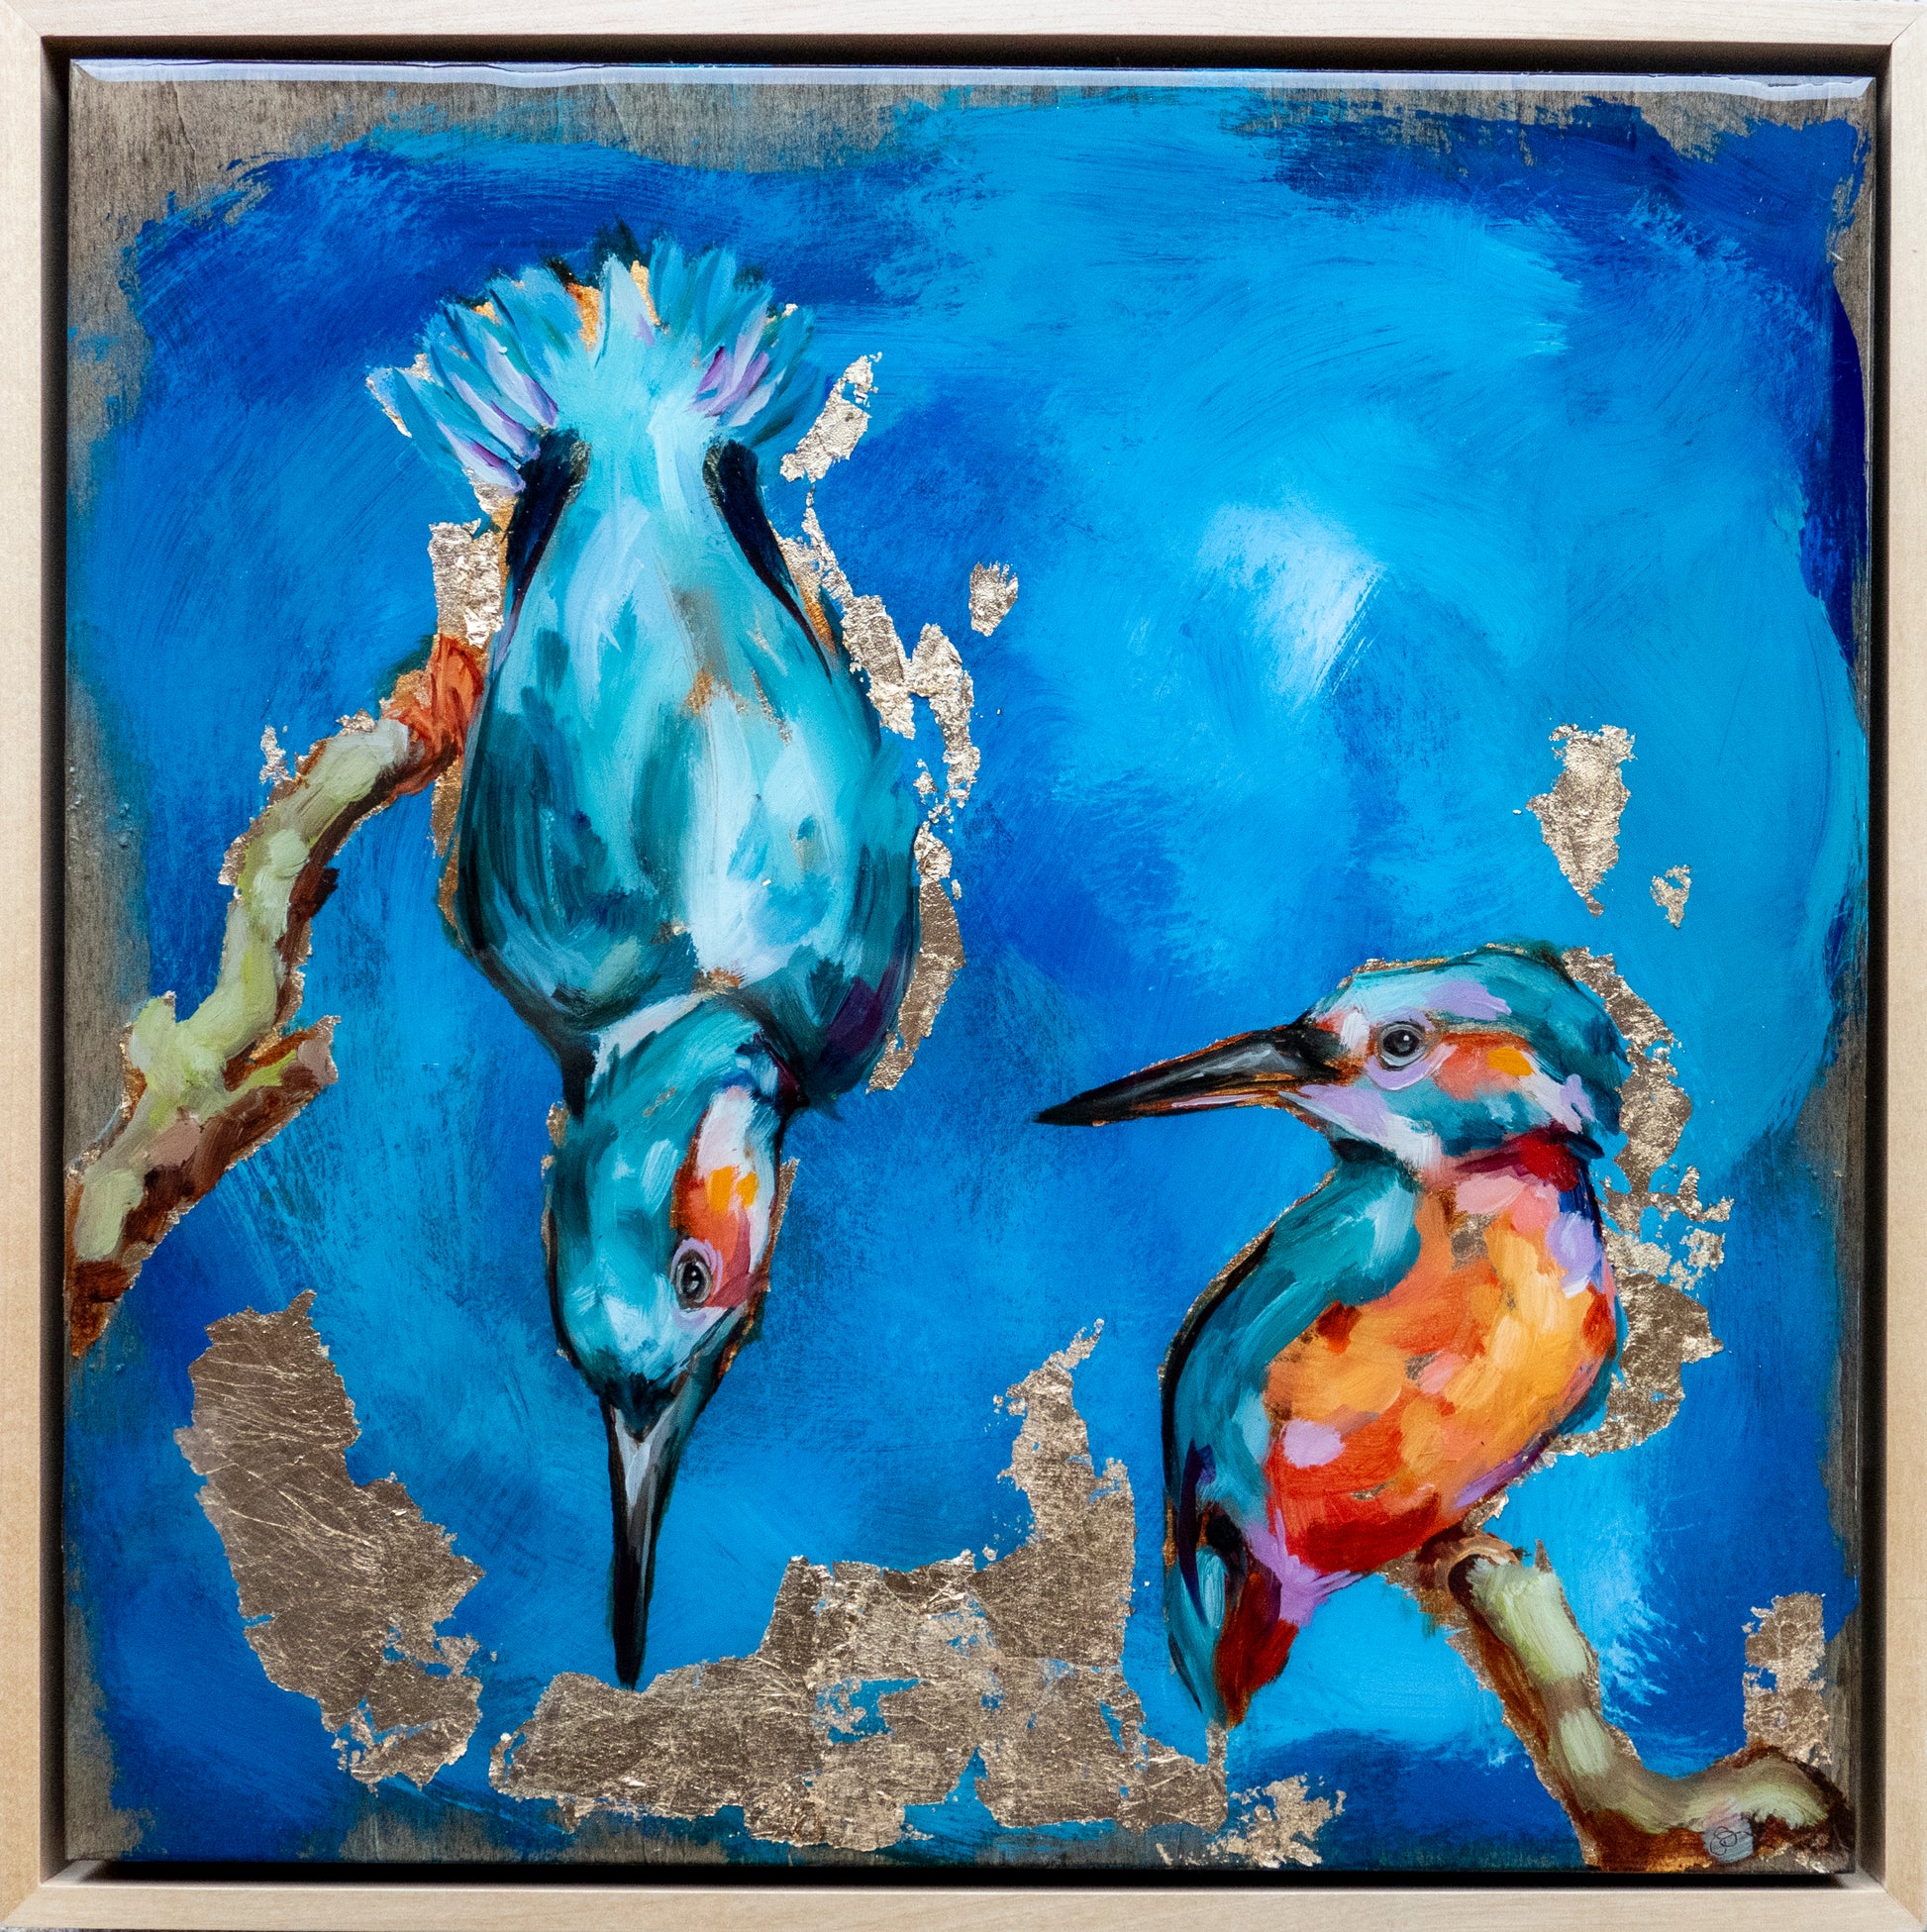 12.5"x12.5" painting of two Kingfishers is mixed media; using acrylic and oil, pencil, and gold leaf with glossy resin finish on surface; colorful with mostly blues and golds; artist Shaney Watters;  incl raw maple float frame